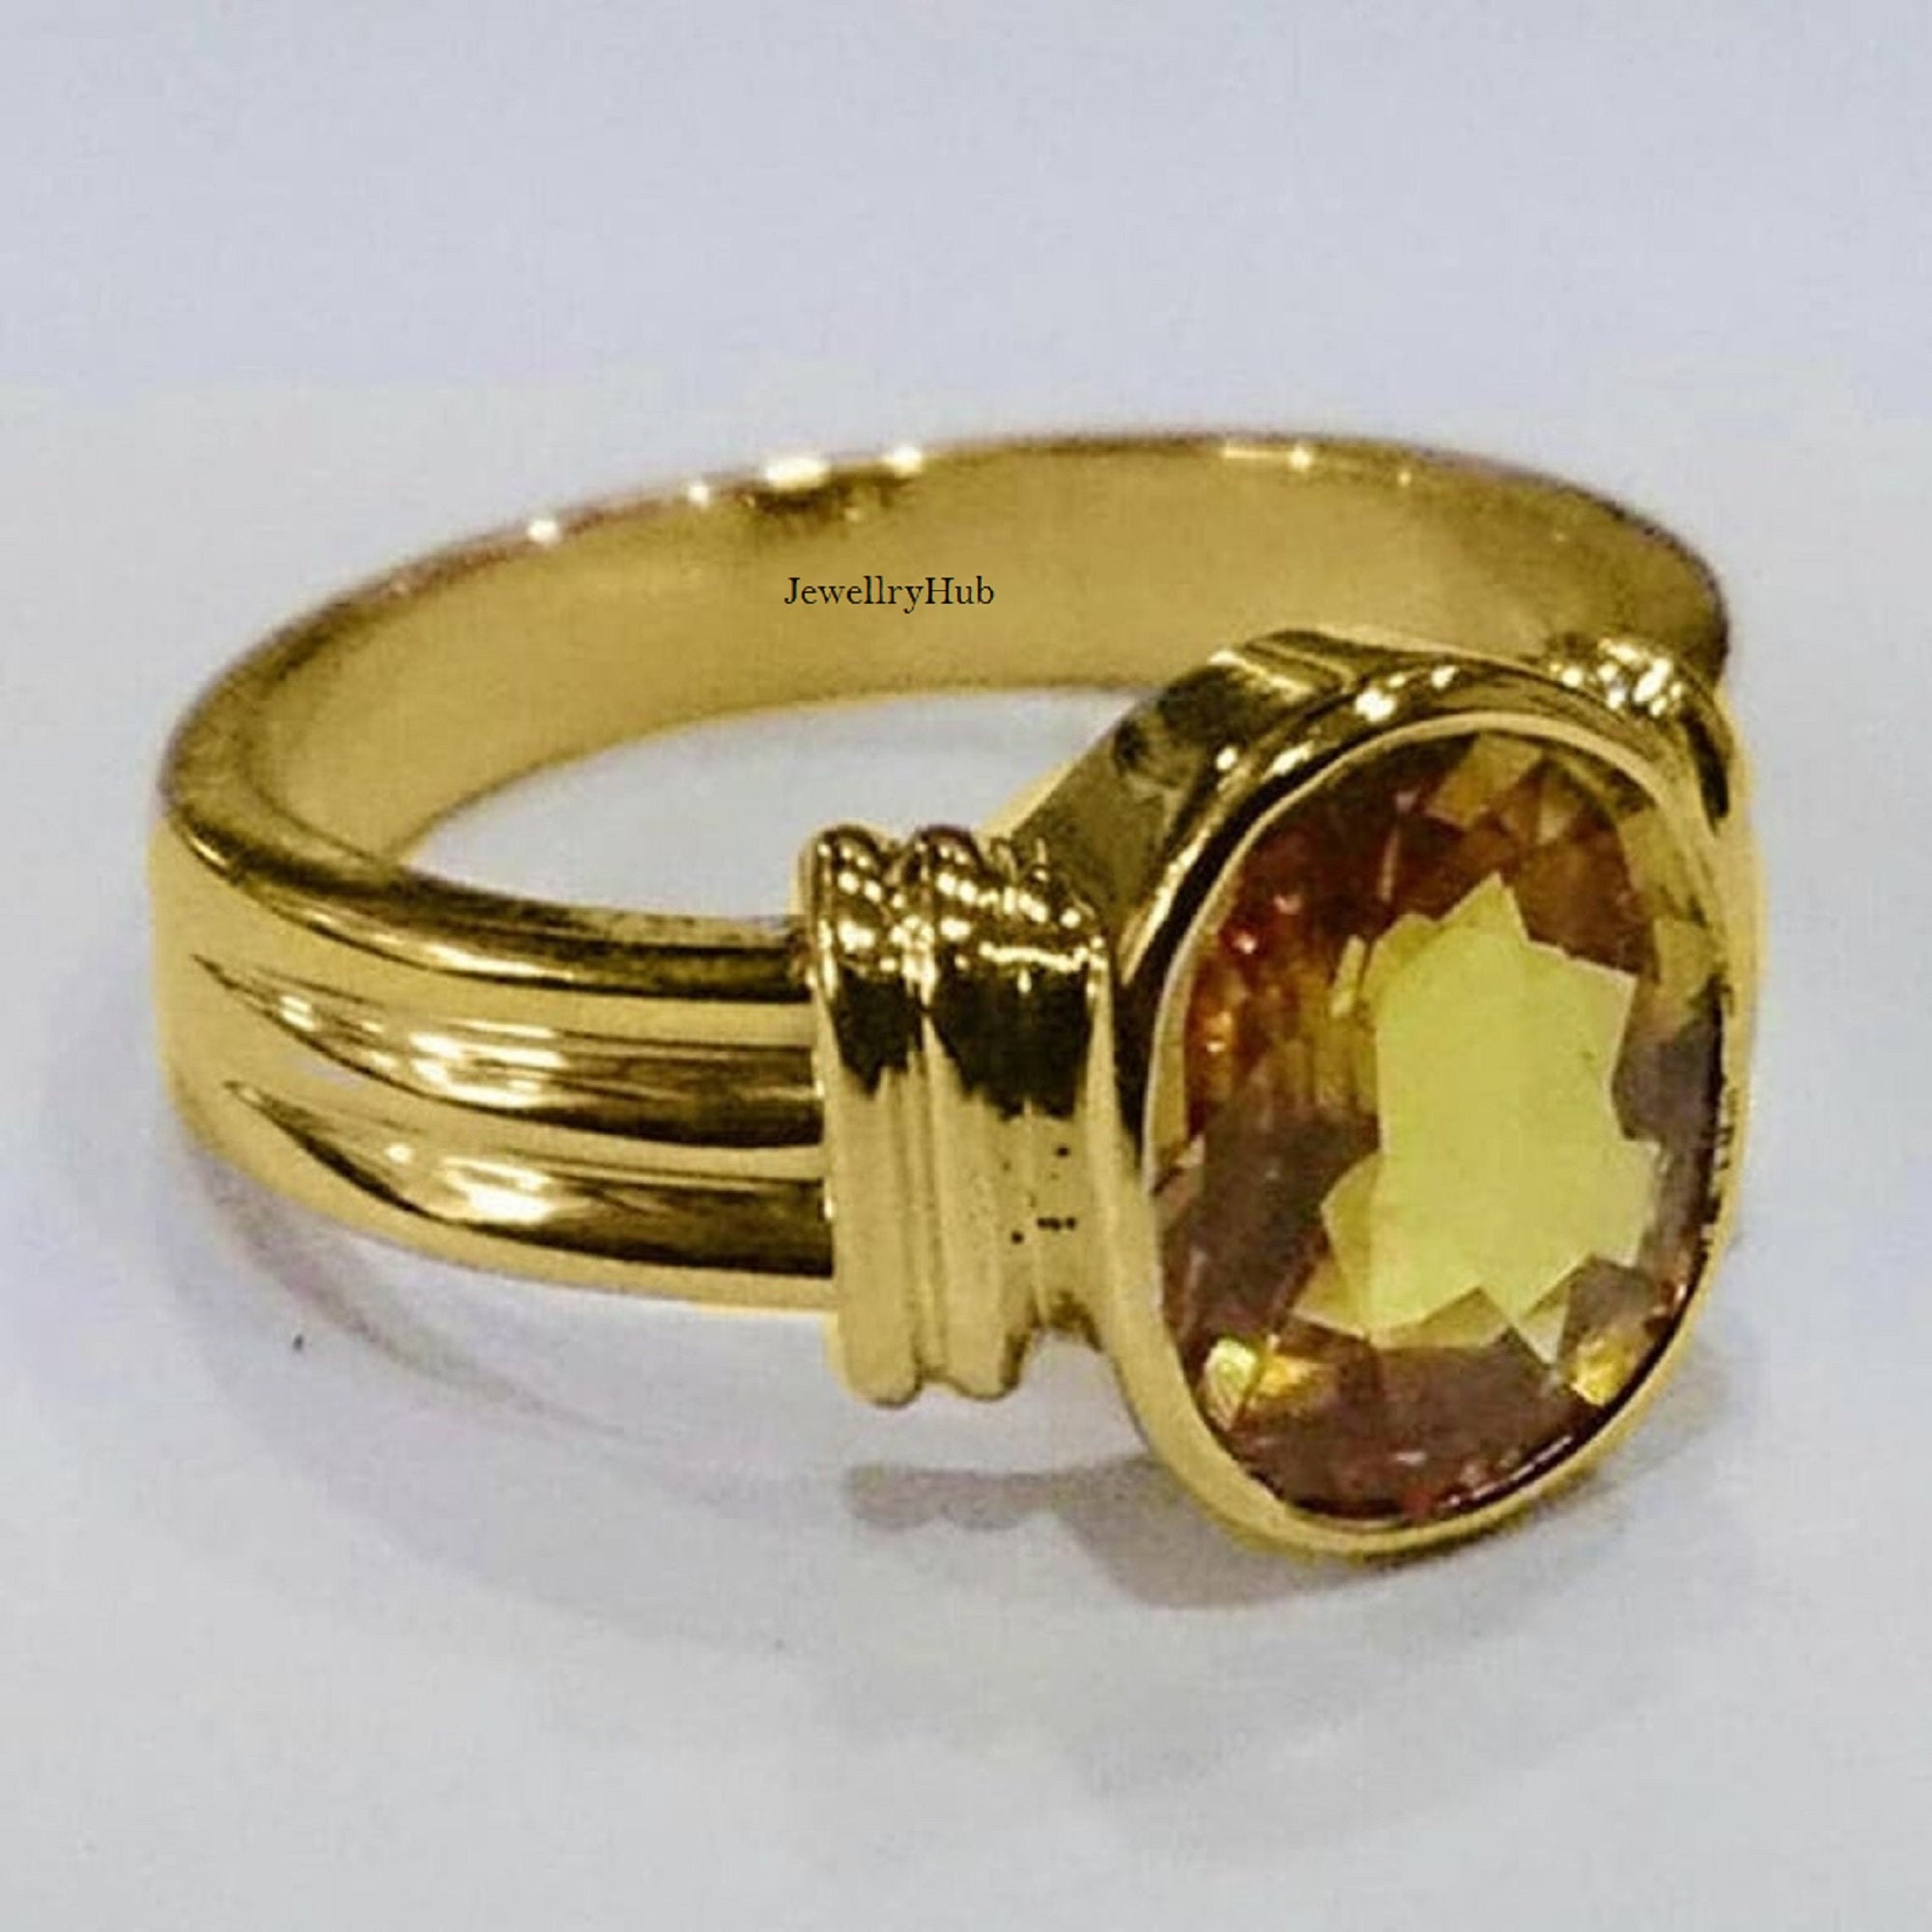 Buy Ceylonmine Natural Yellow Sapphire Pukhraj Gemstone Gold Plated Ring  Online at Best Prices in India - JioMart.